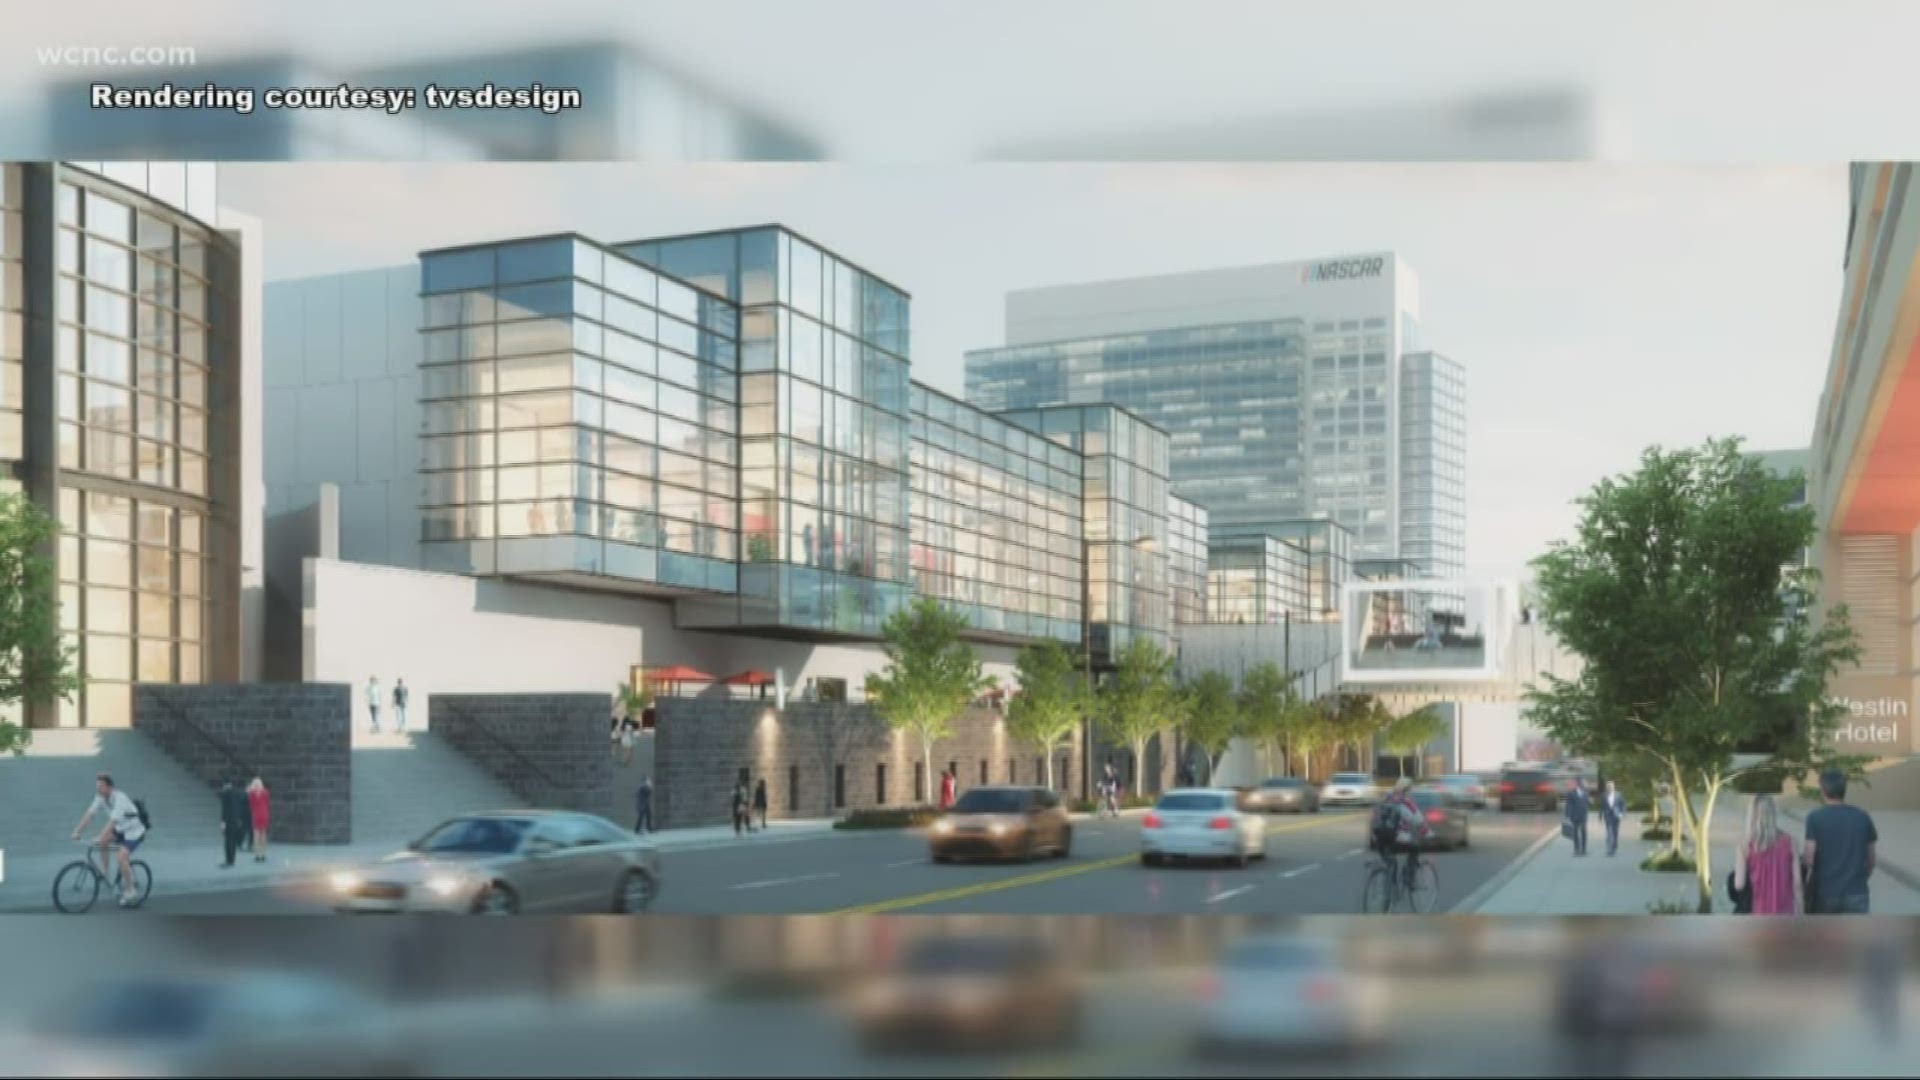 The project will add an additional 50,000 square feet of meeting space and a pedestrian bridge linking the new wing to The Westin Hotel.